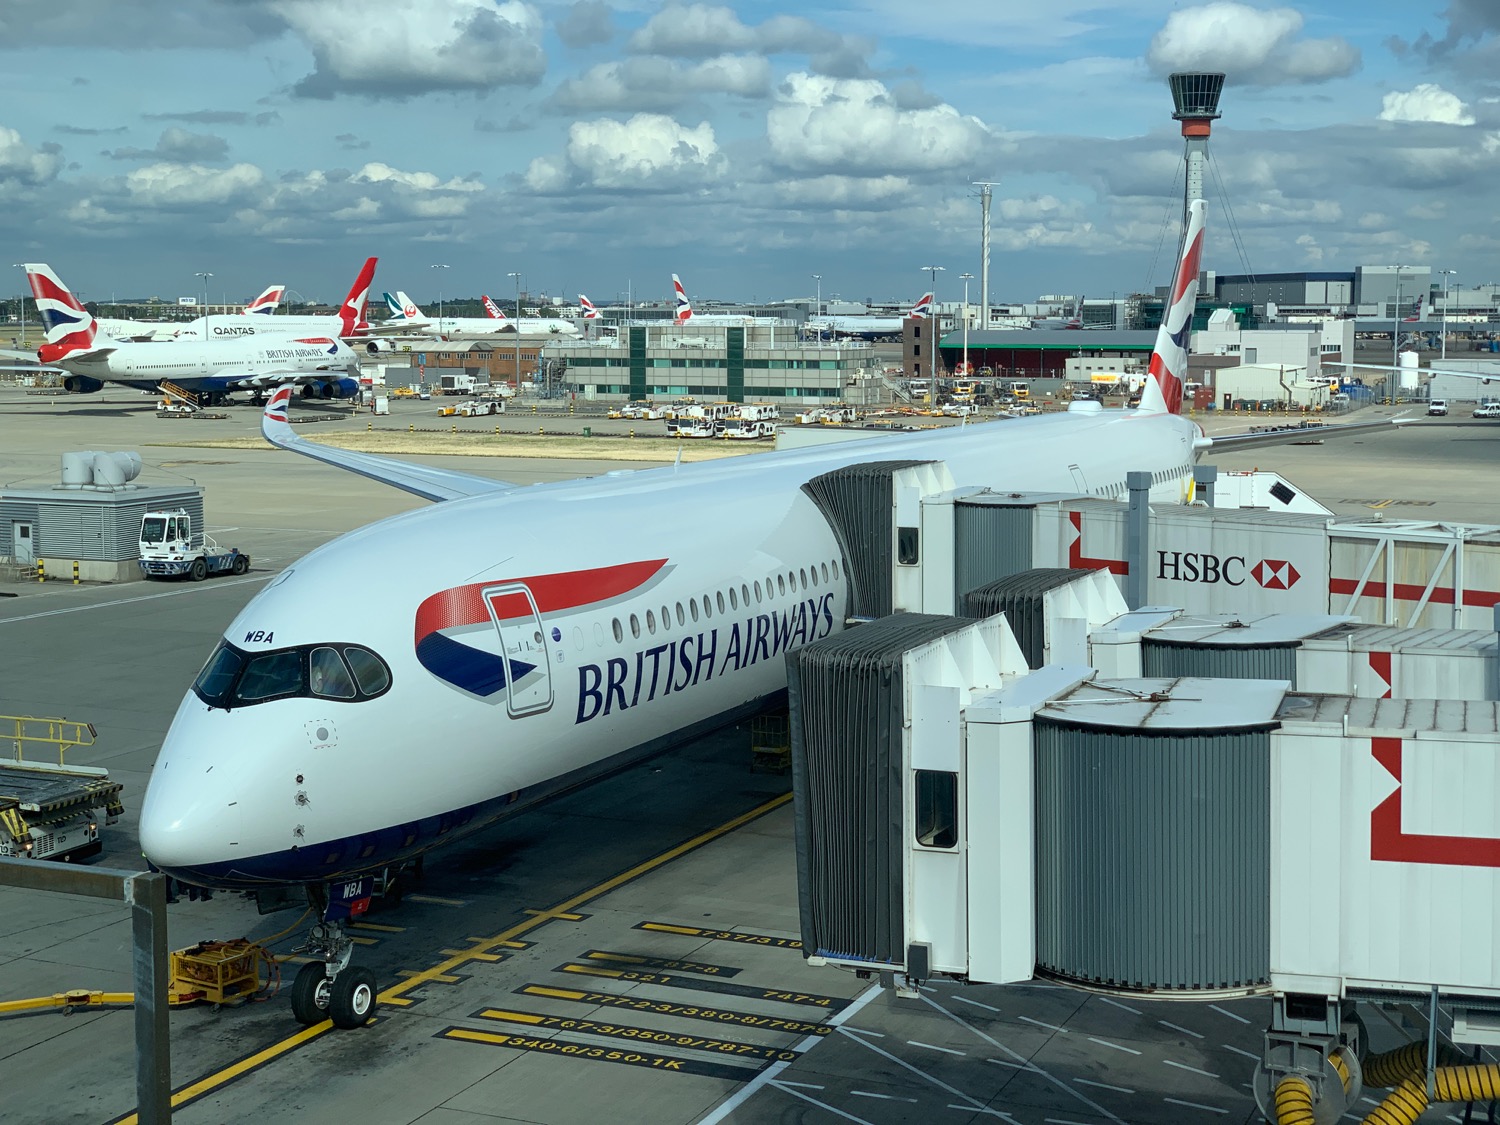 Review British Airways A3501000 Business Class Live and Let's Fly